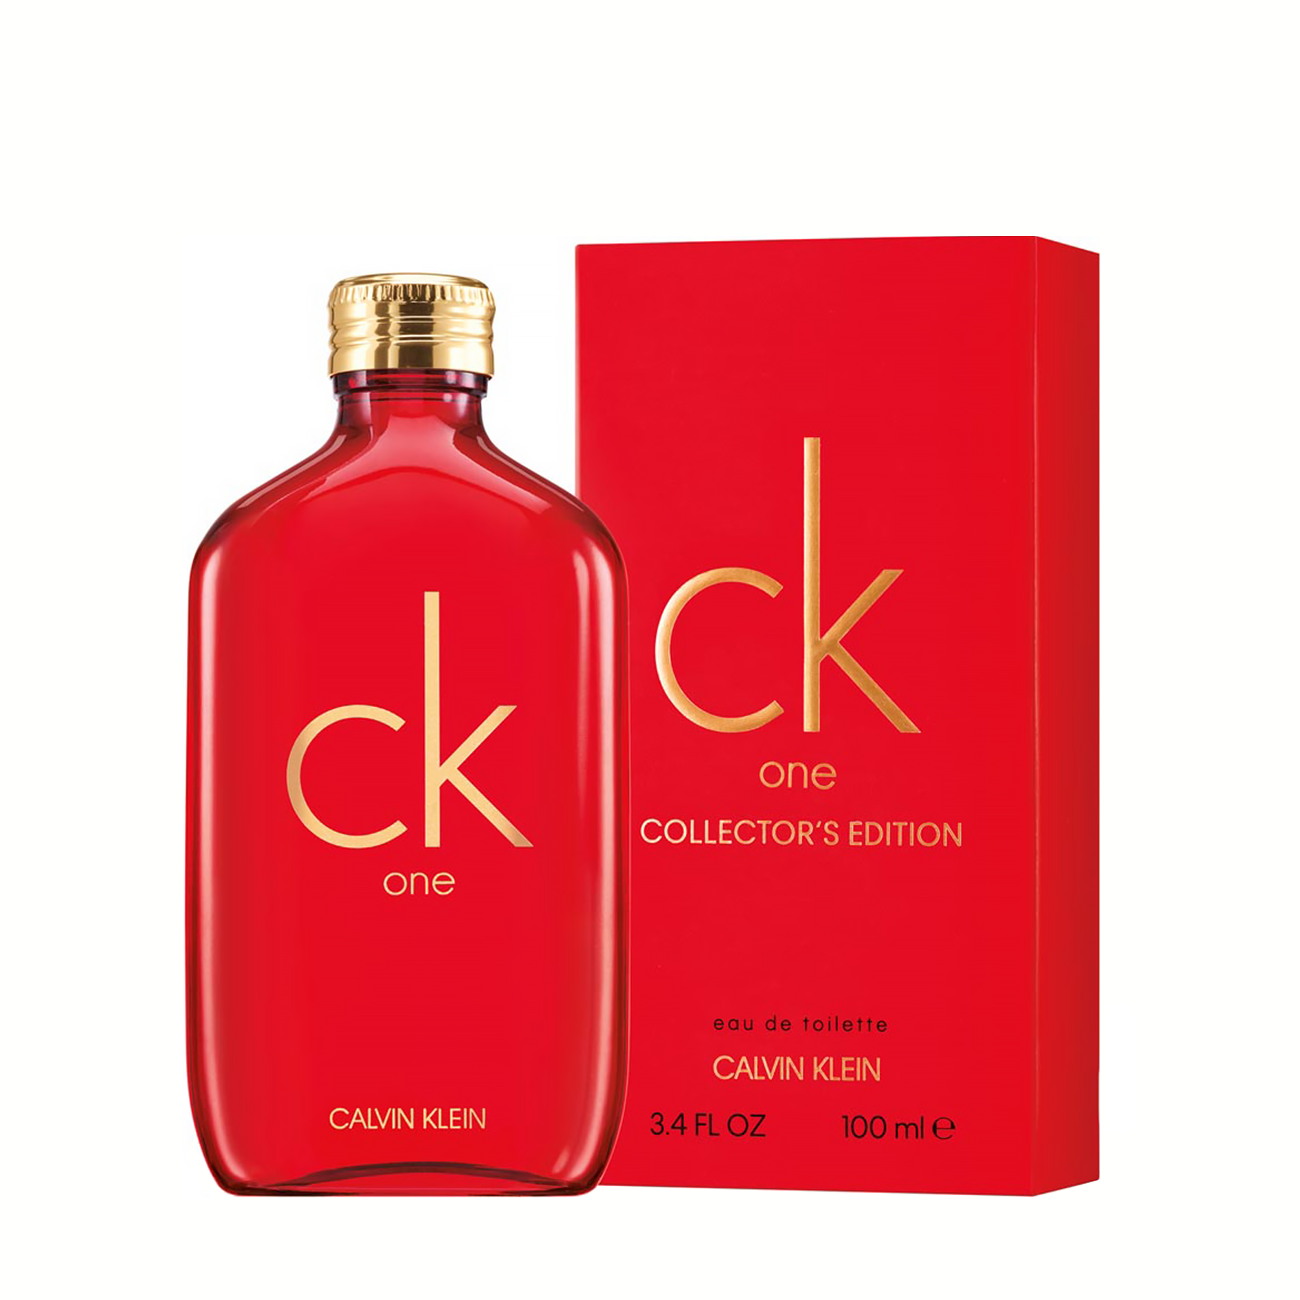 CK ONE COLLECTOR’S EDITION 100 ml 100